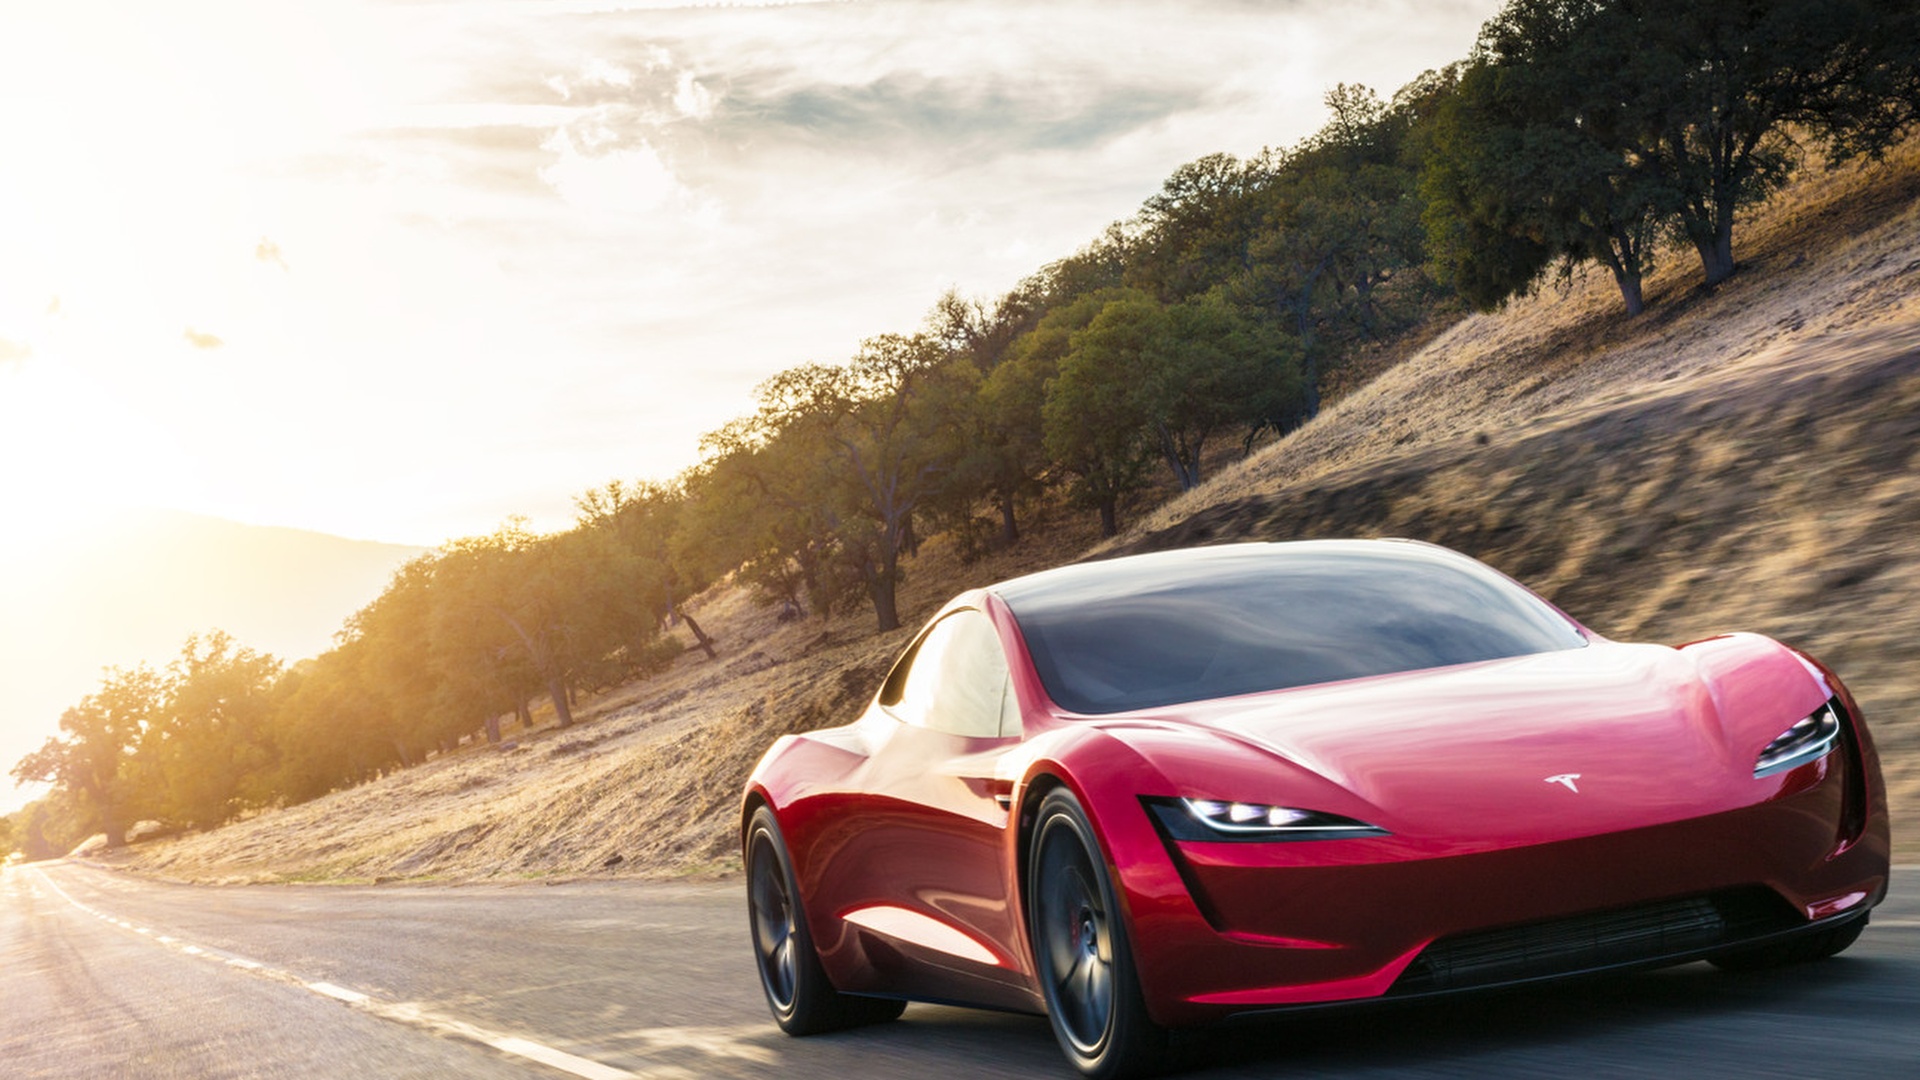 10 of the most expensive electric cars in the world » Green Authority